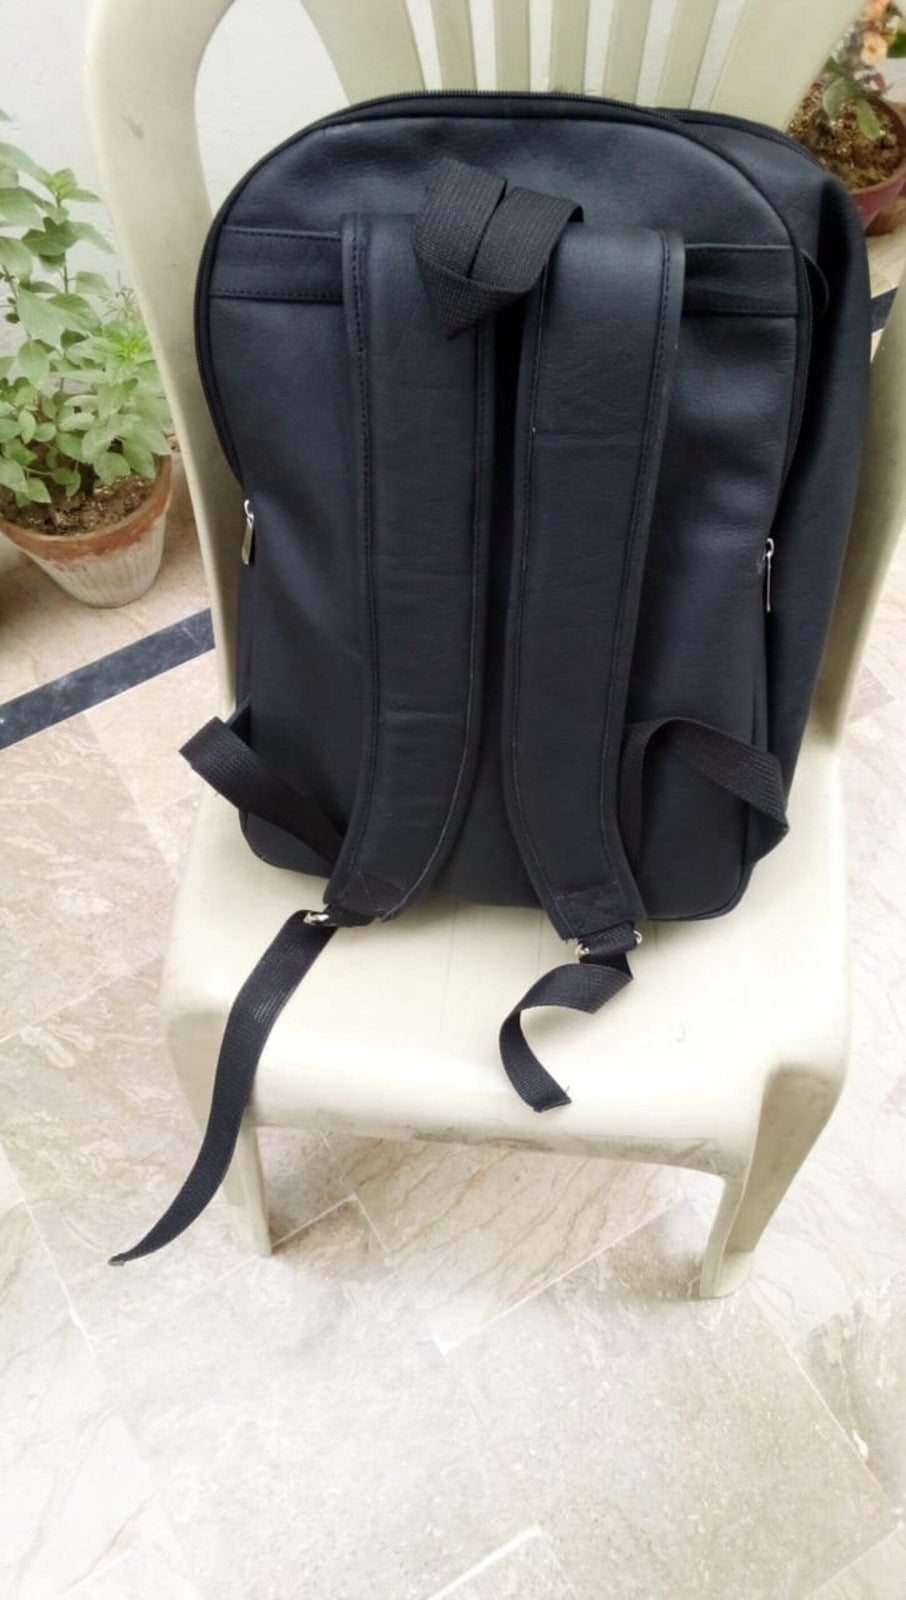 Open cowhide backpack revealing compartments